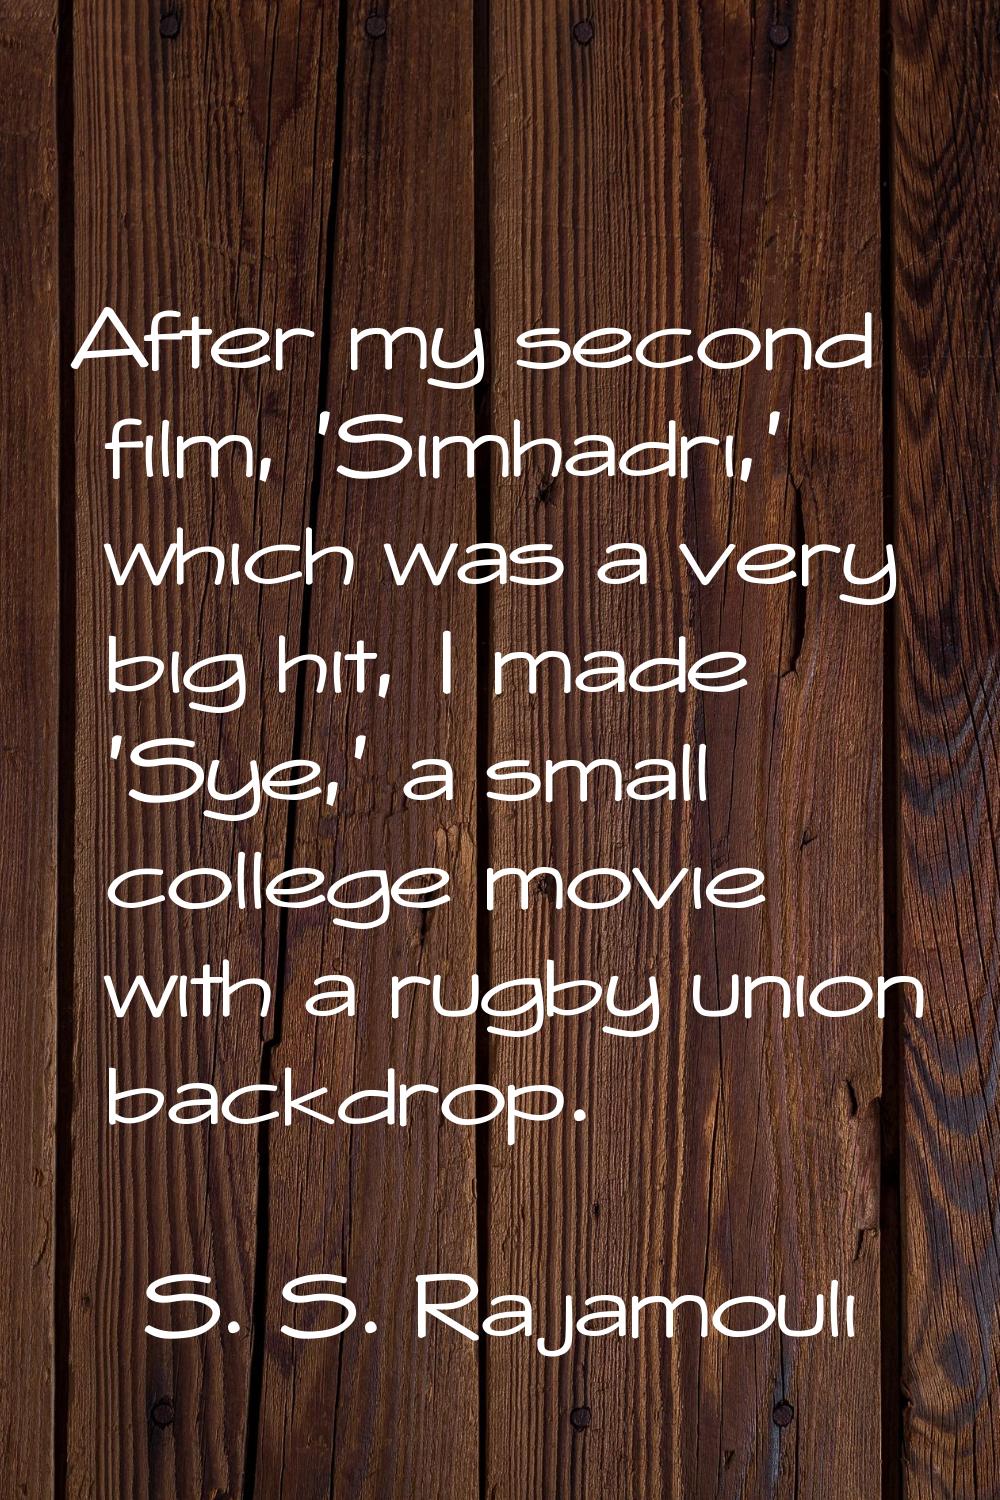 After my second film, 'Simhadri,' which was a very big hit, I made 'Sye,' a small college movie wit